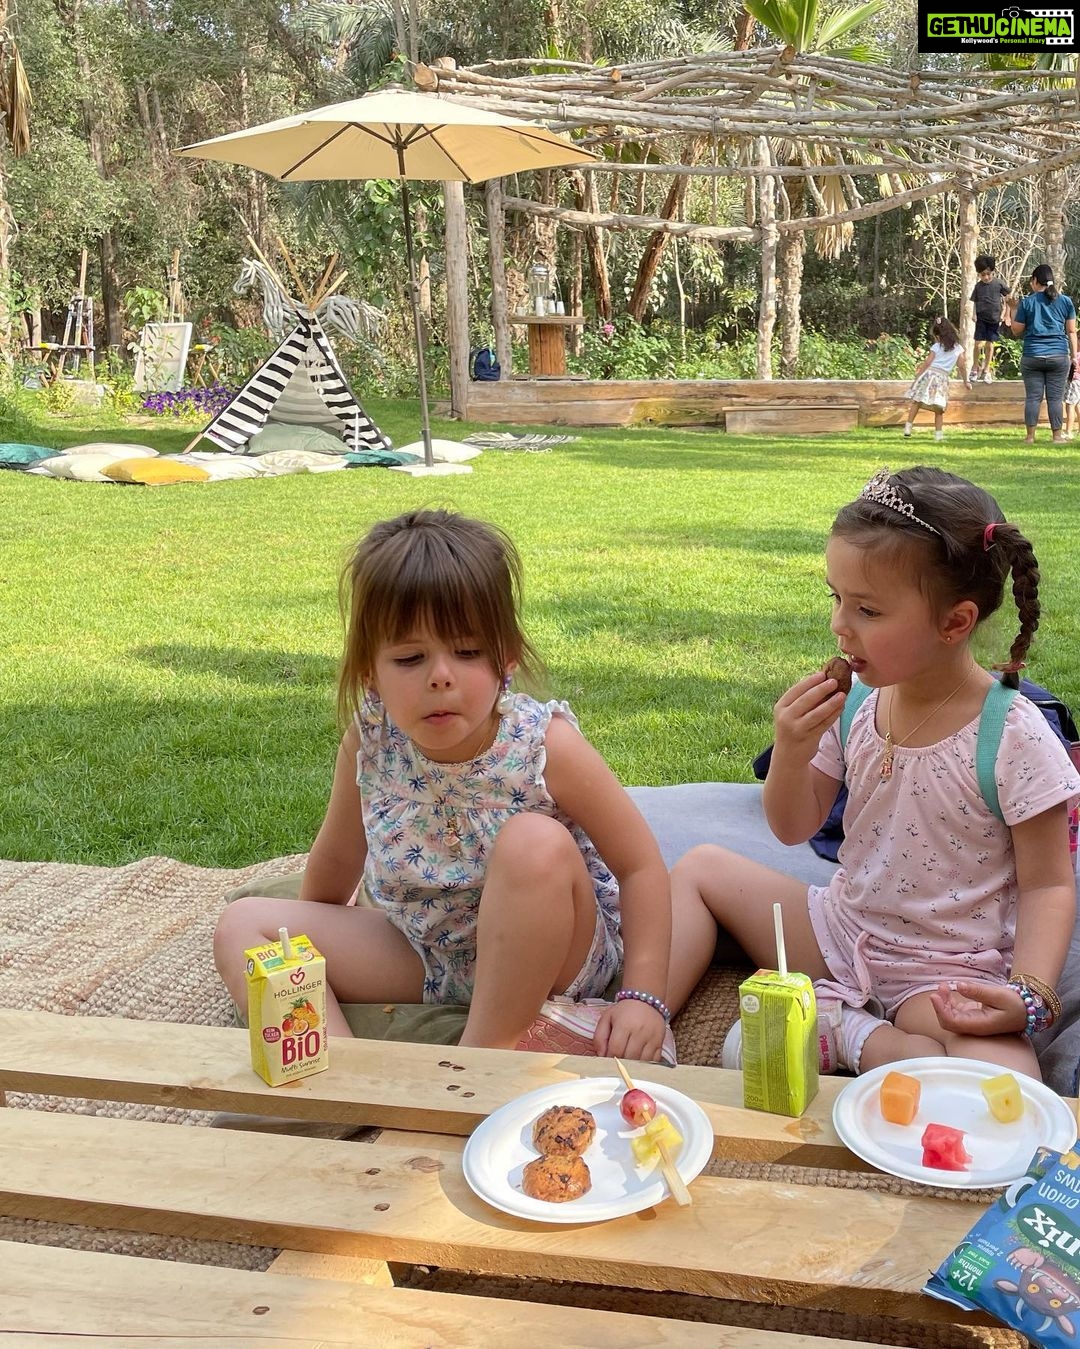 Lisa Ray Instagram - Happy Birthday Oraan and Rowan! Thanks for inviting us to be part of the celebrations Hetal and Neel @greynoisedxb Yes this is also Dubai ; birdsong, sun streaking through a canopy of green, a mud kitchen and watering hole. Dubai has much to offer beyond malls and upscale dining if you are looking further. #NatureEscapes @albarari_dubai